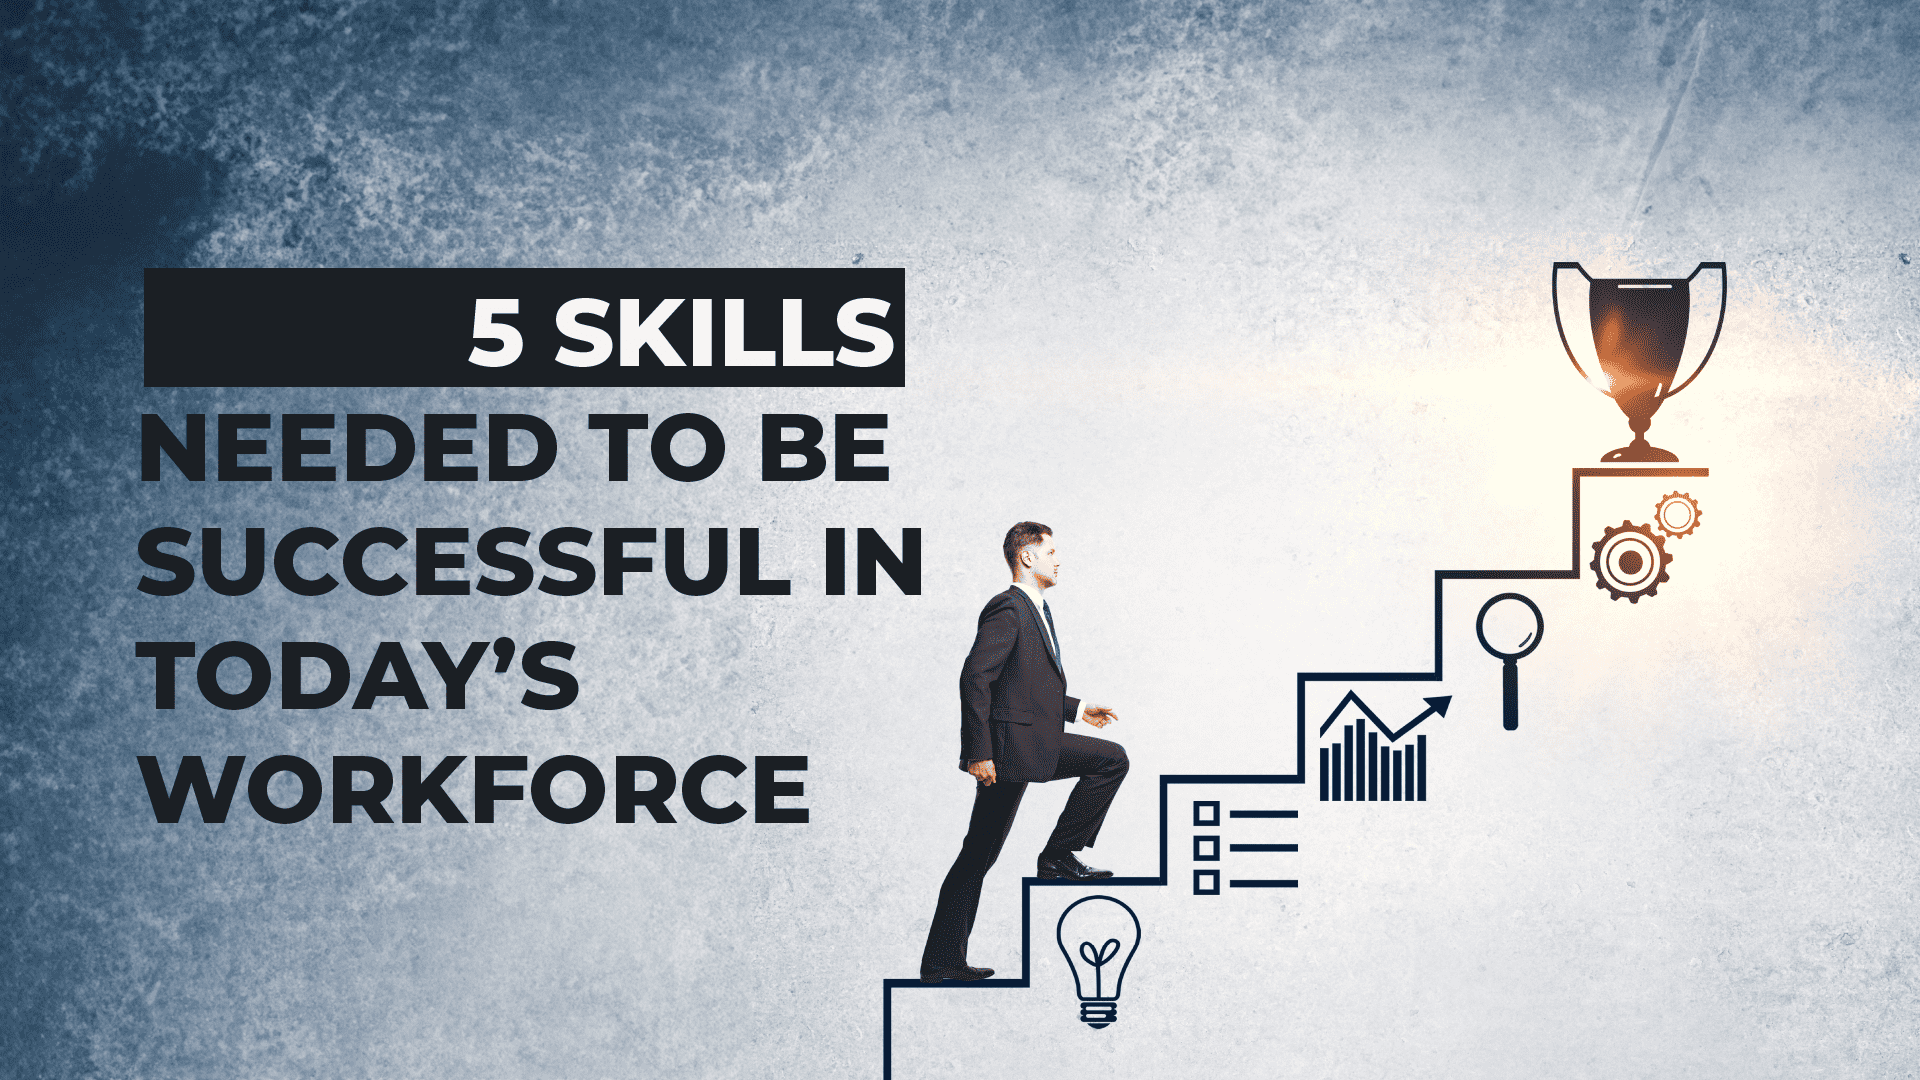 5 Skills Needed to be Successful in Today’s Workforce